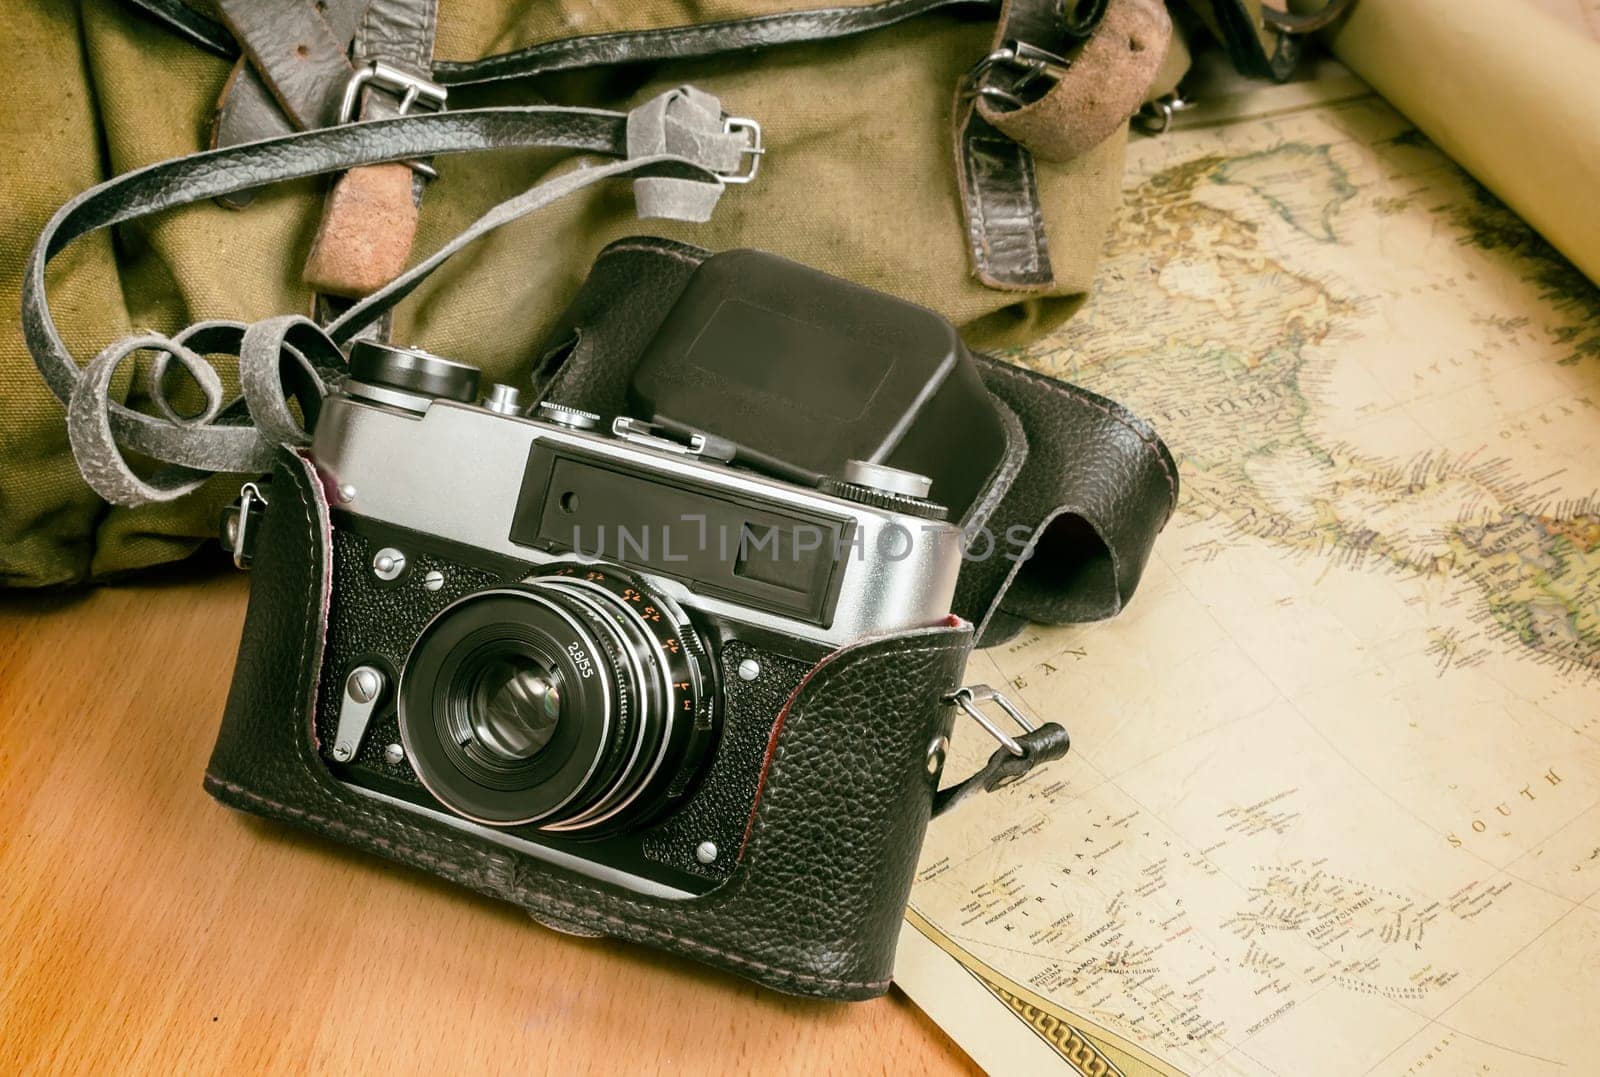 Items needed for travel: a large backpack, camera, map of the world. Vintage items in retro style.